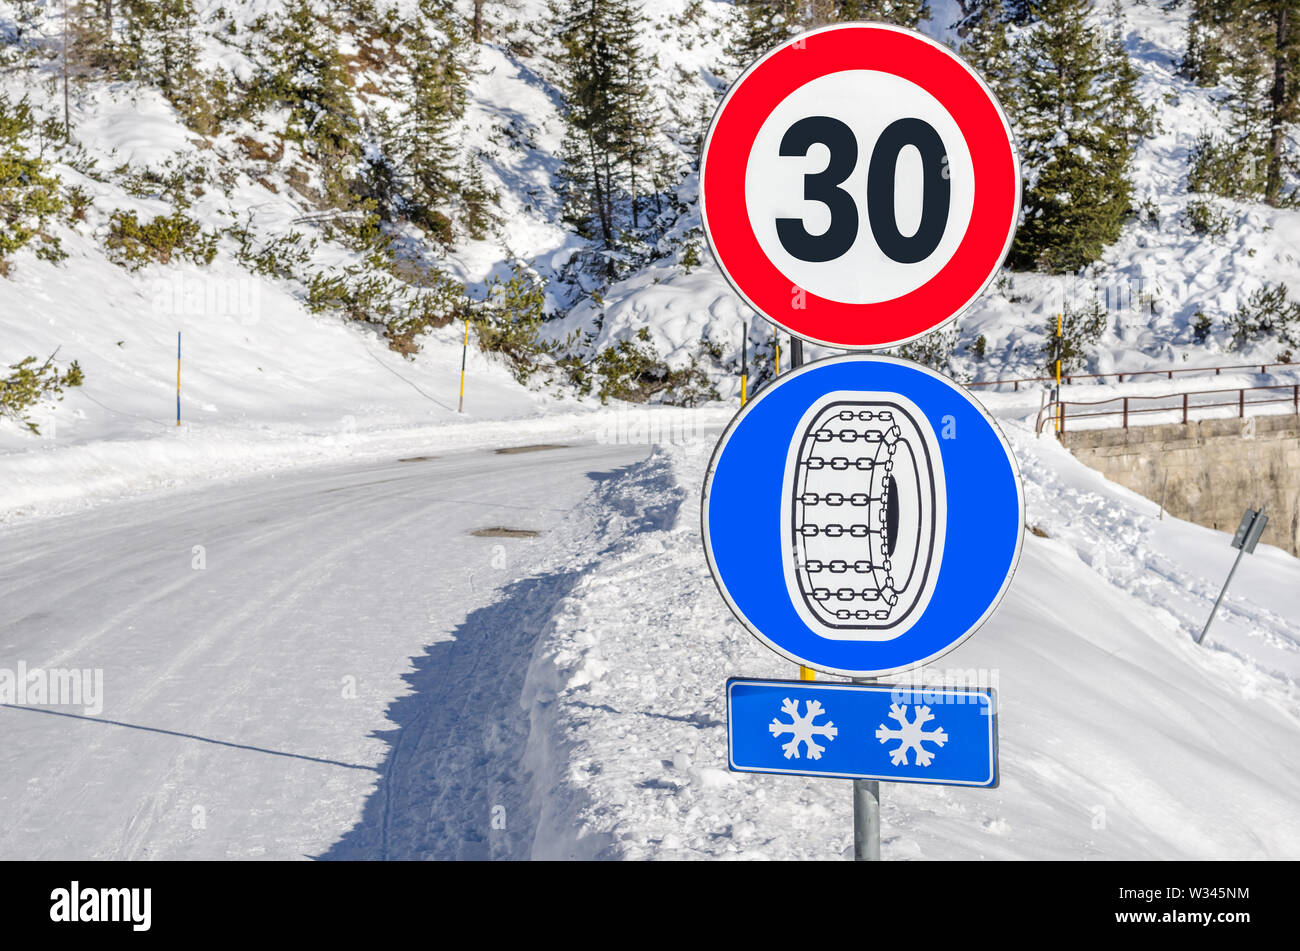 Snow chains mandatory road sign below a speed limit sign along a winding snowy mountain road Stock Photo